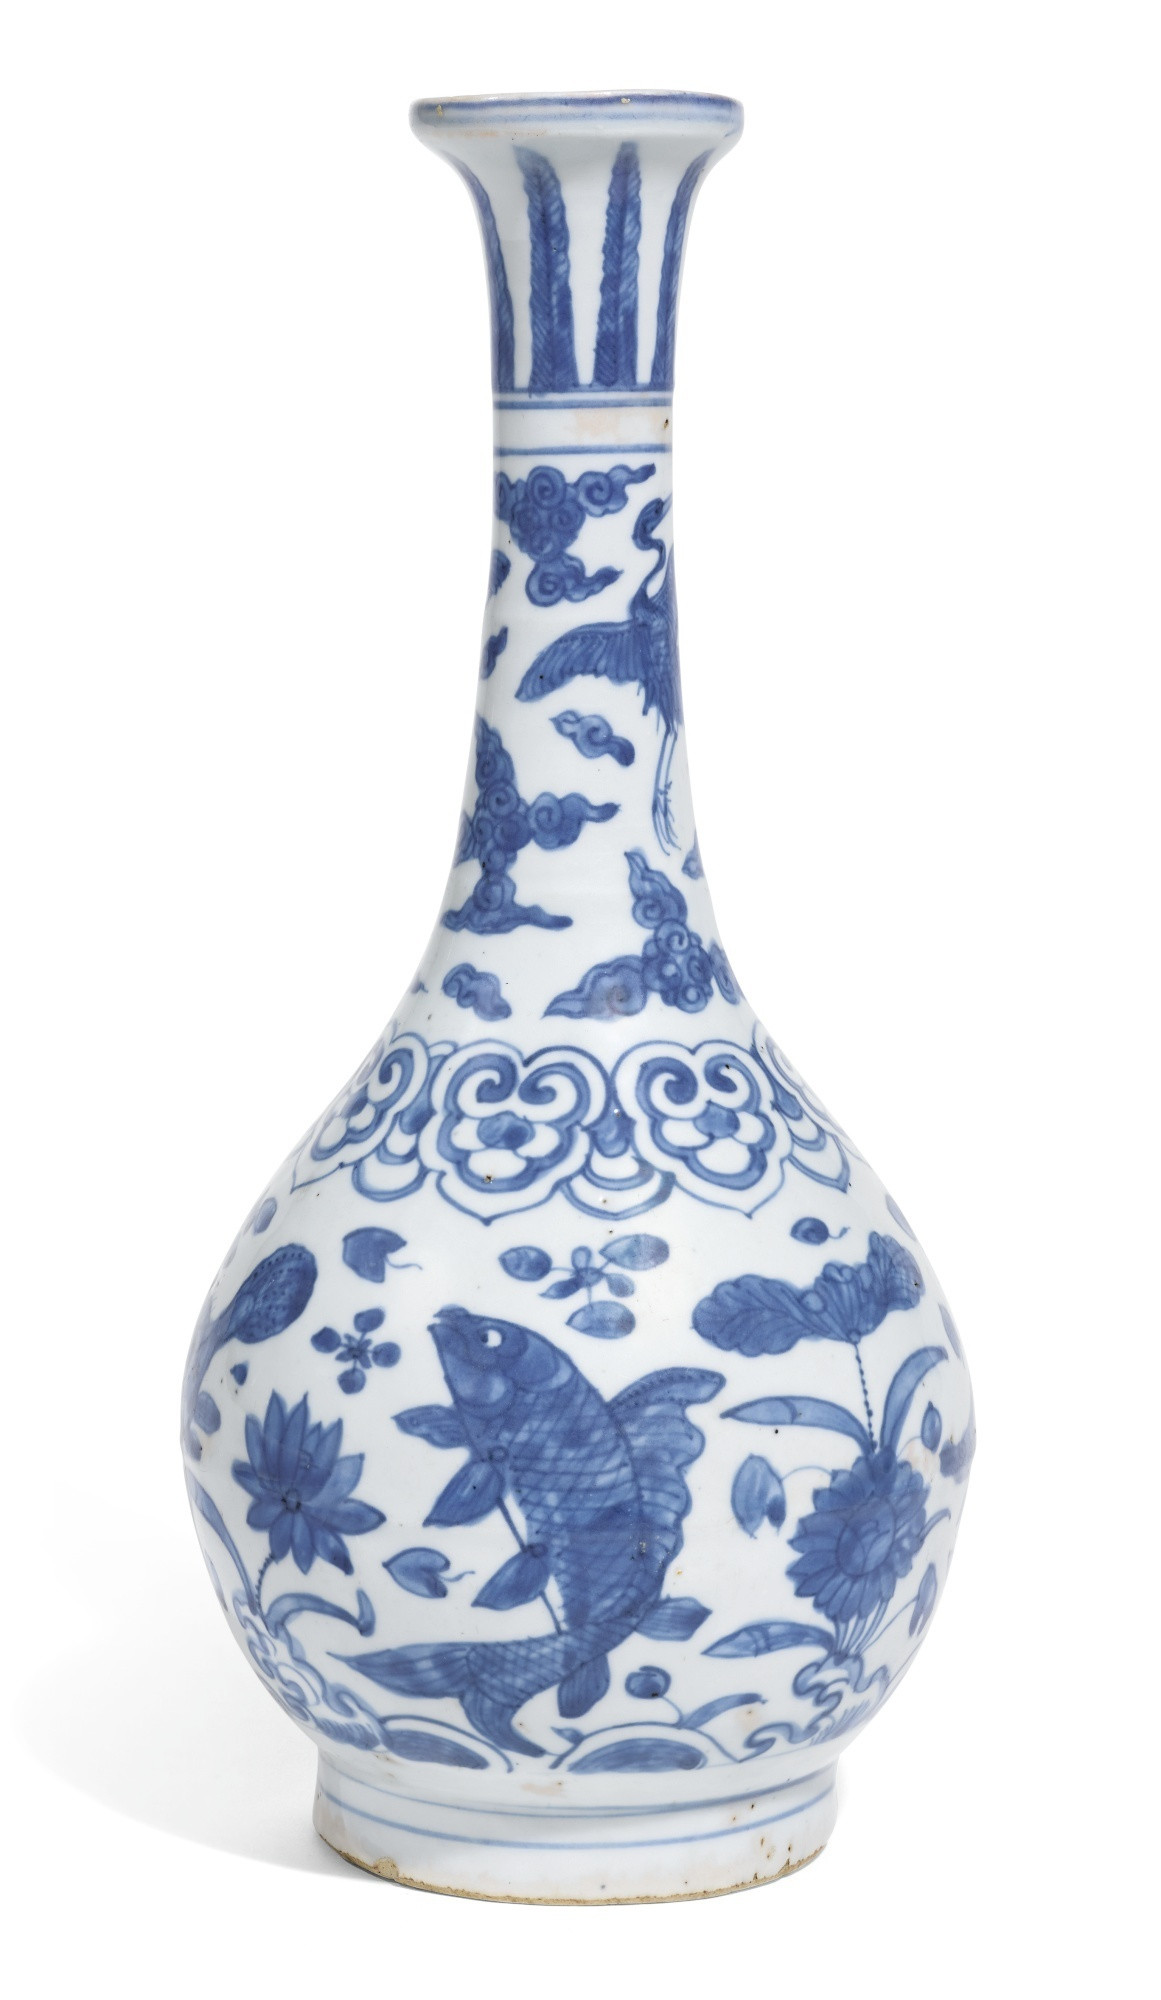 21 Great Love Bird Vase 2024 free download love bird vase of an unusual blue and white ming vase yuhuchun ping with fish for an unusual blue and white ming vase yuhuchun ping with fish decoration